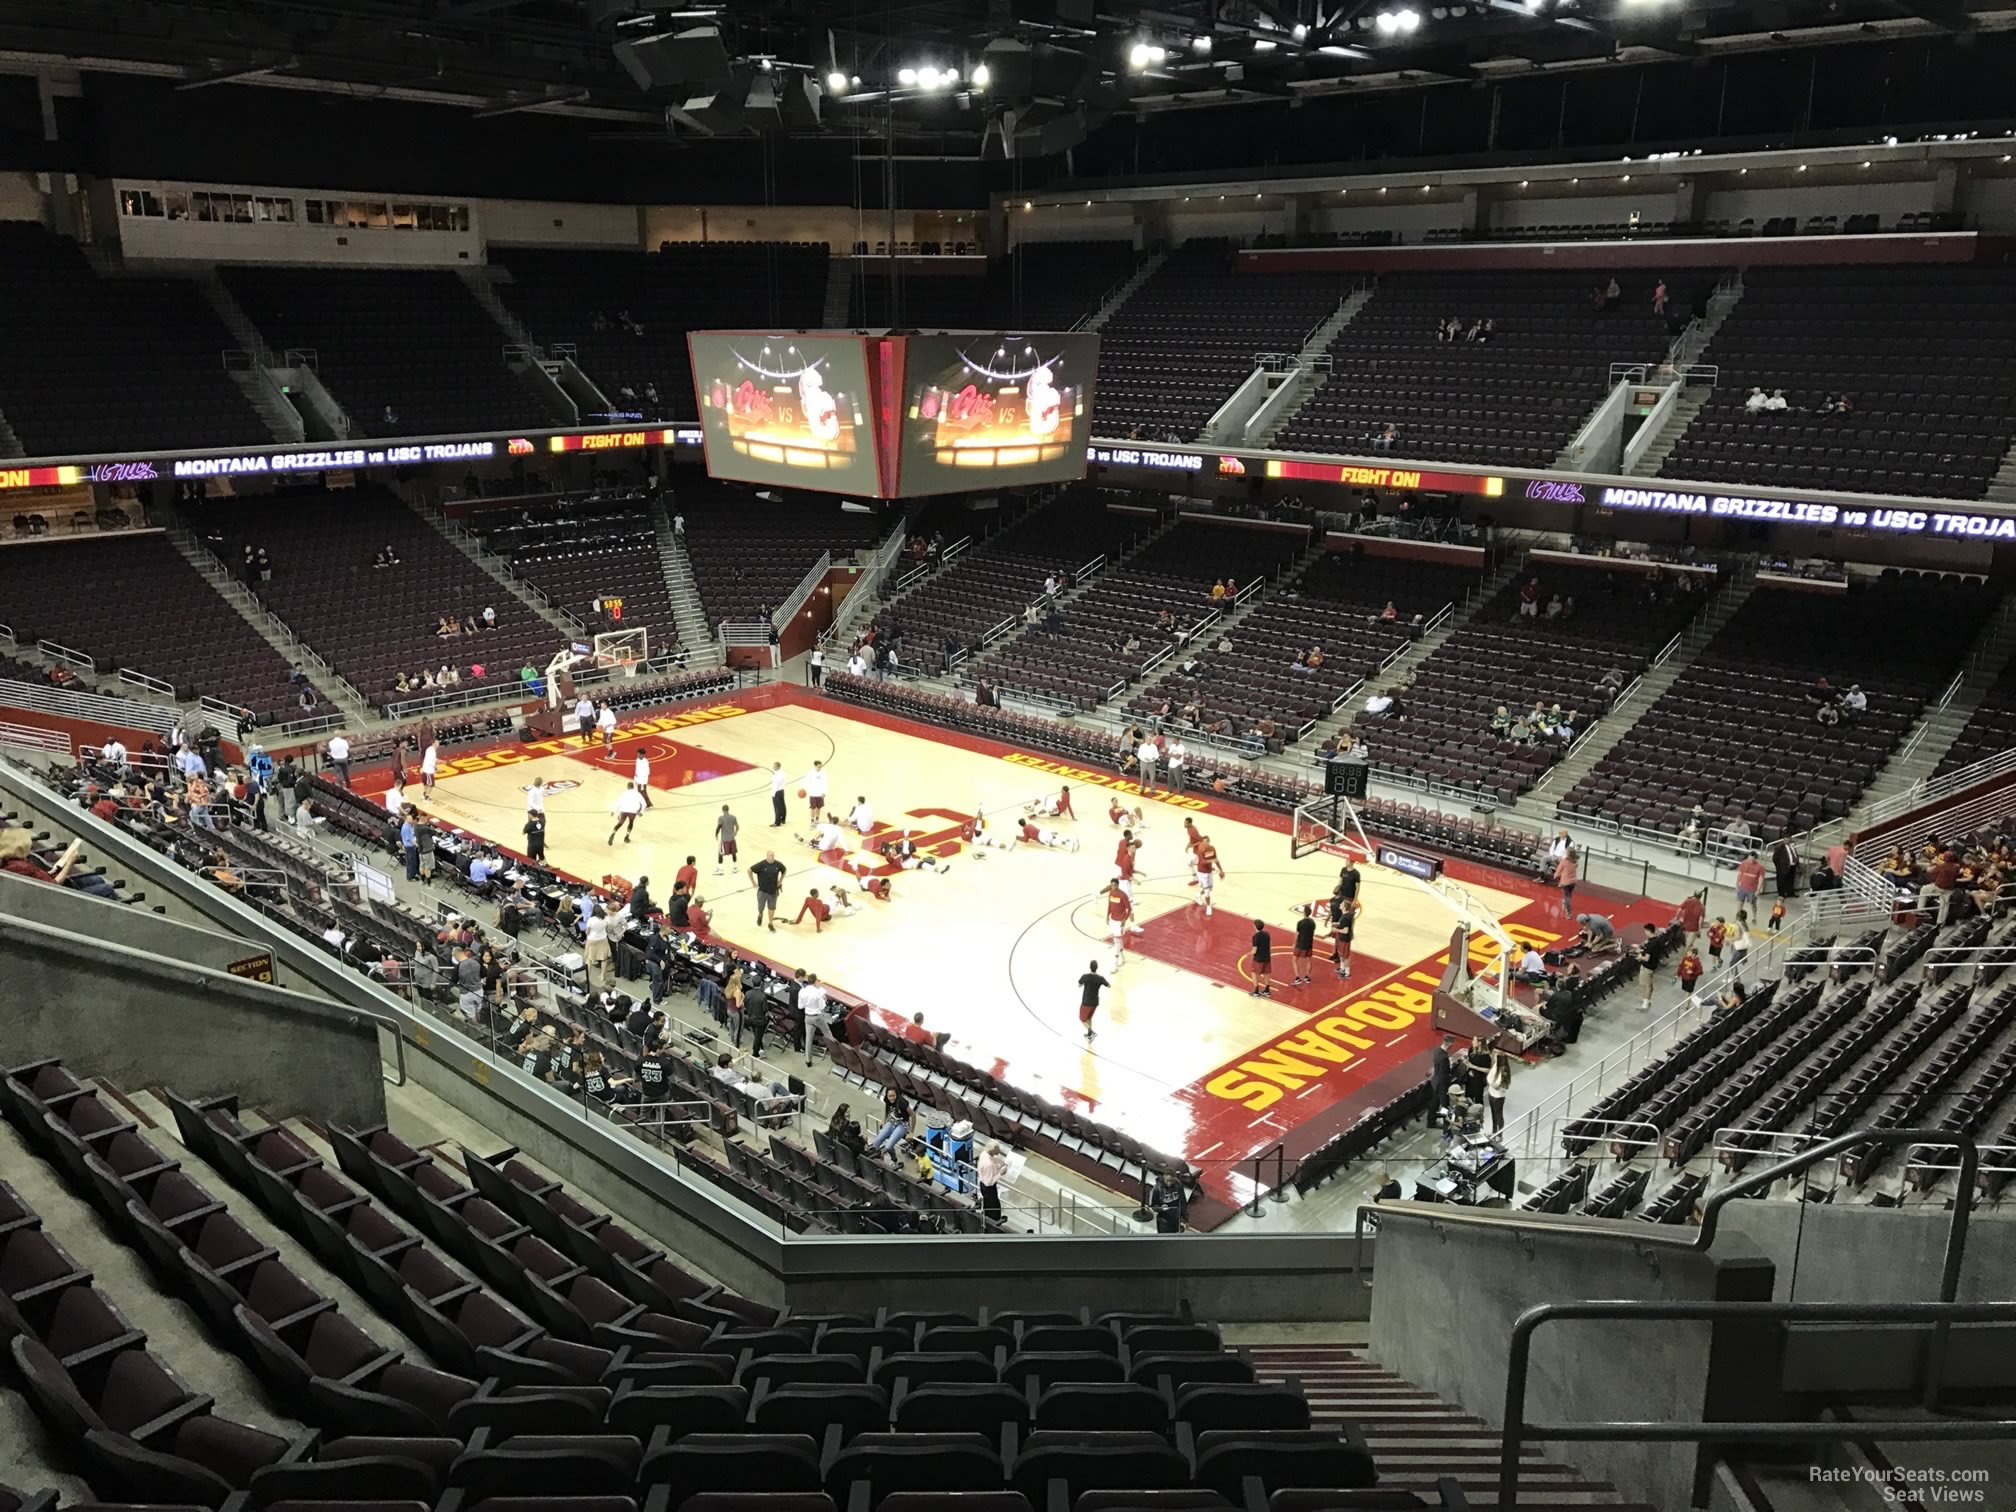 section 221, row 10 seat view  - galen center